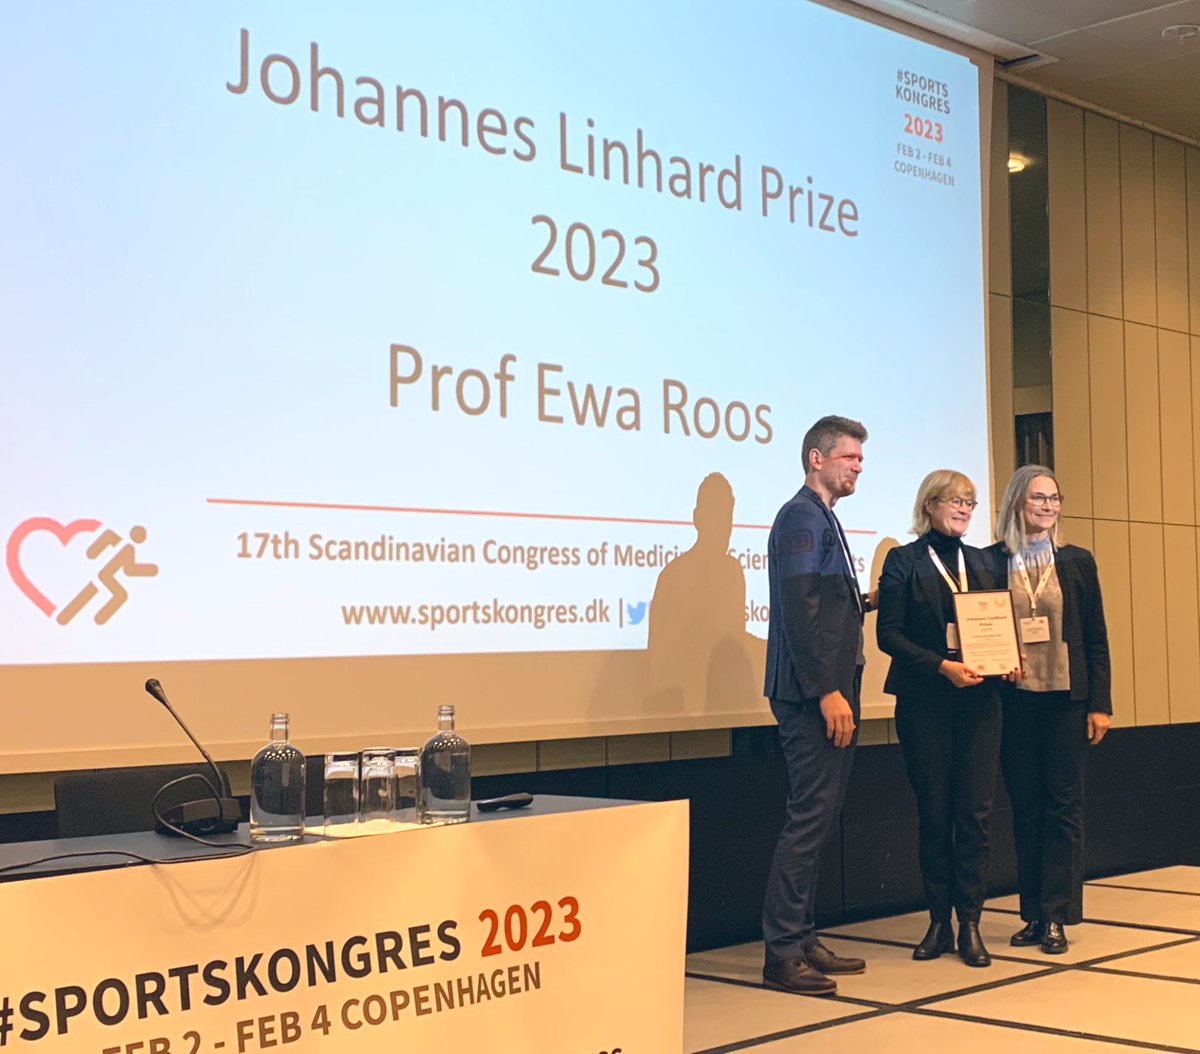 Thanks and congratulations to an outstanding clinician, researcher and mentor (to so many): you inspire so many in #SportsMedicine, and continue to guide the way. Because of leaders like Prof @ewa_roos, #WomenInSTEM see what is possible 🙏🏻